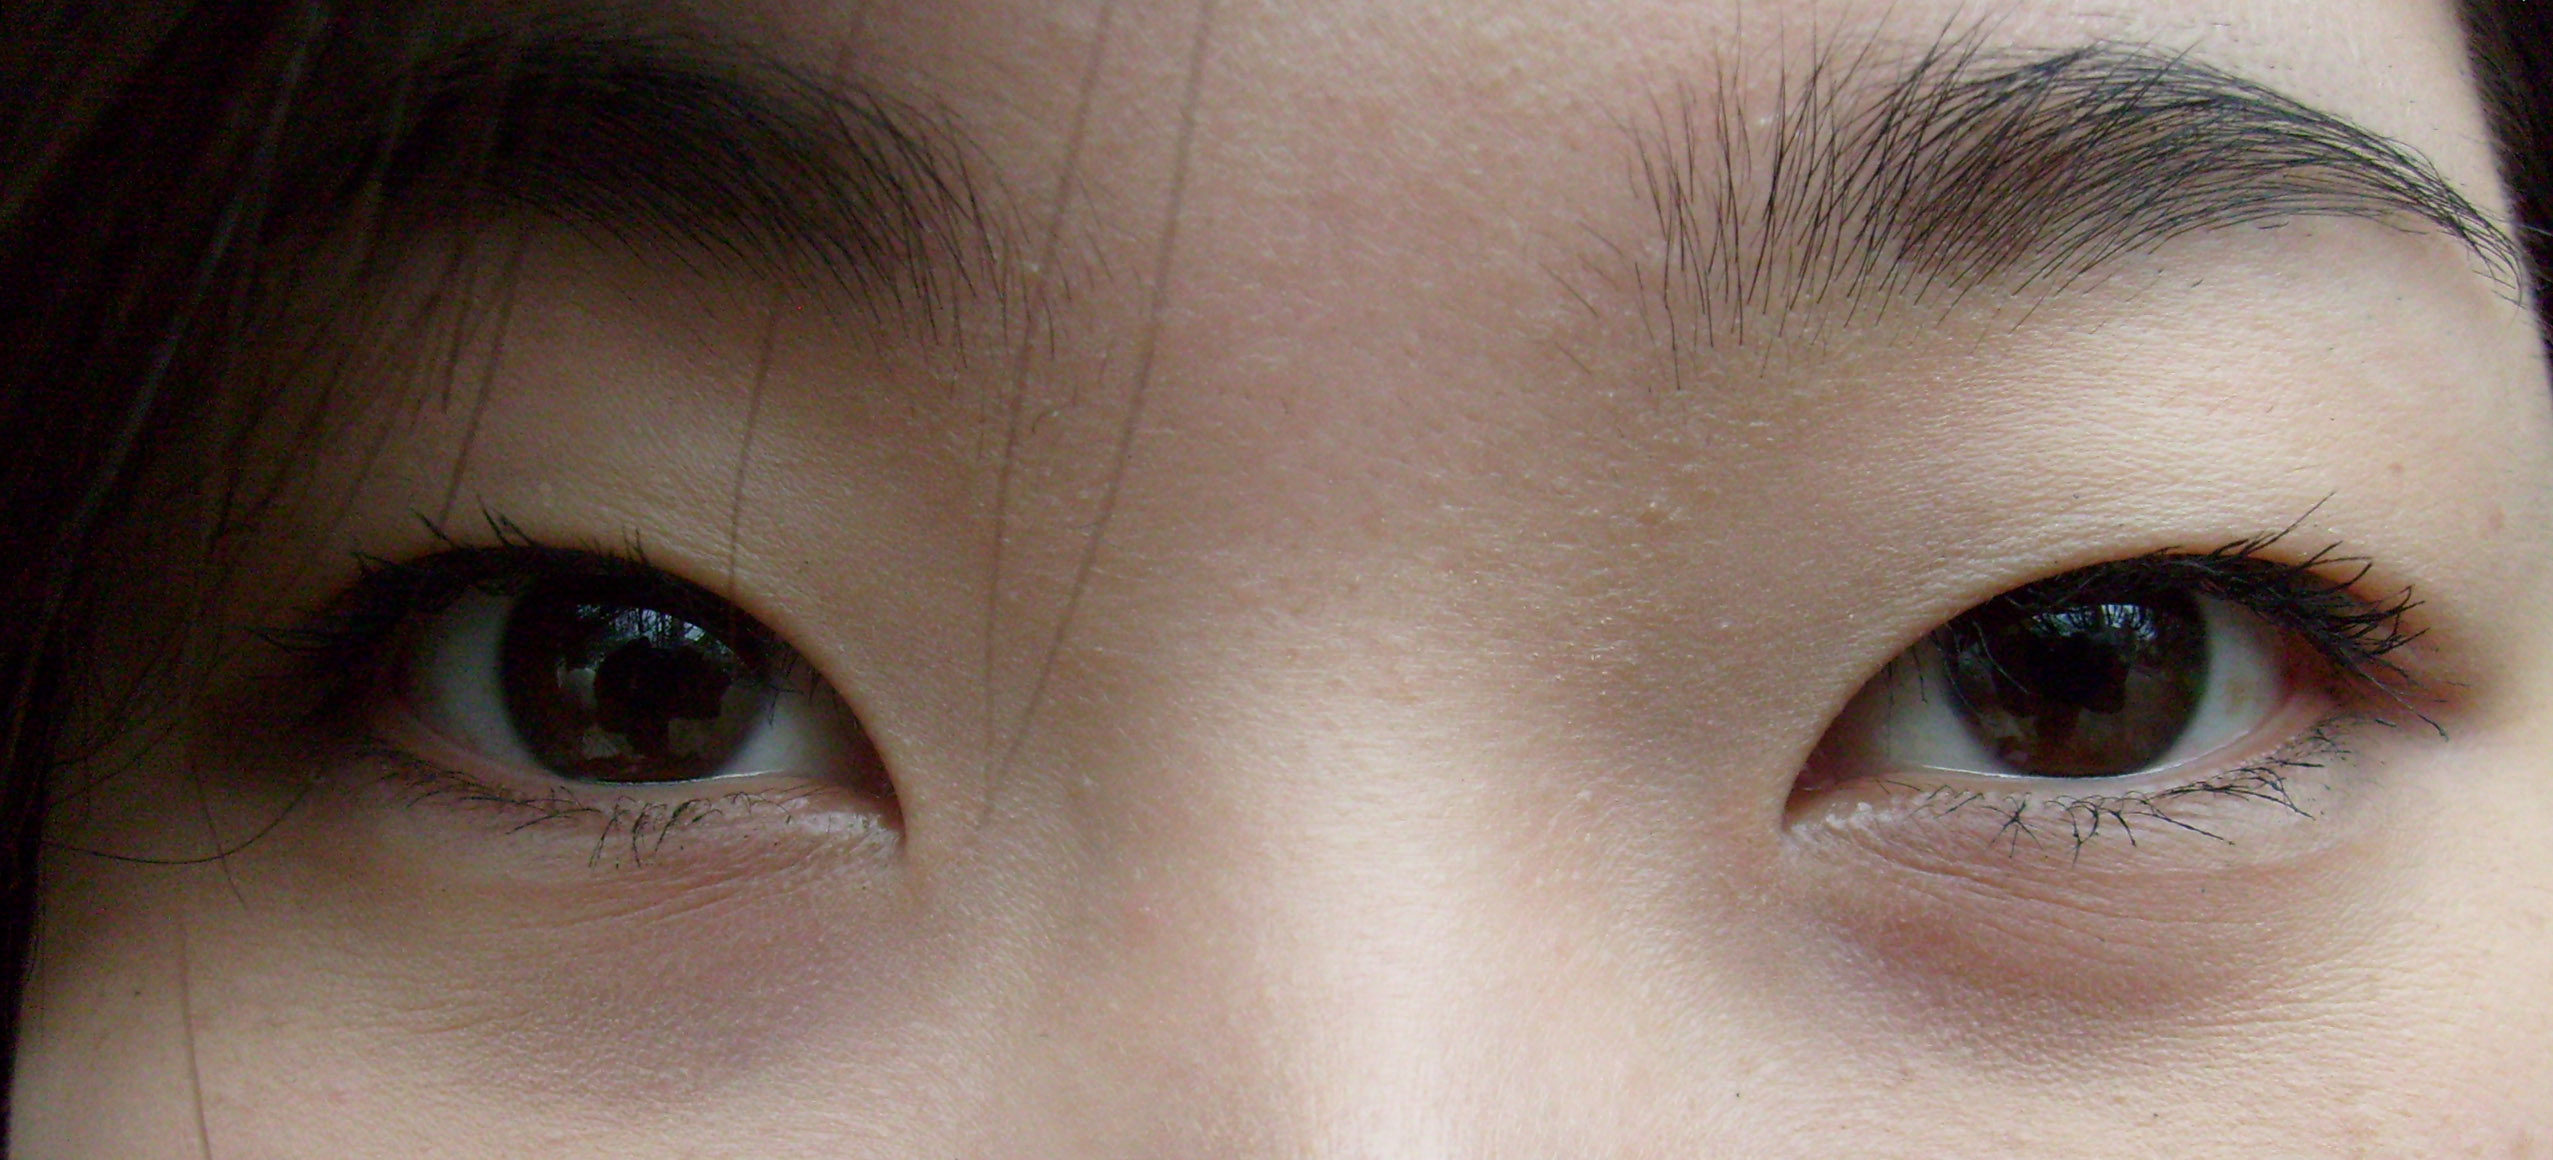 The Western Eye: How I Learned to Live With My Eyelids Global Comment.